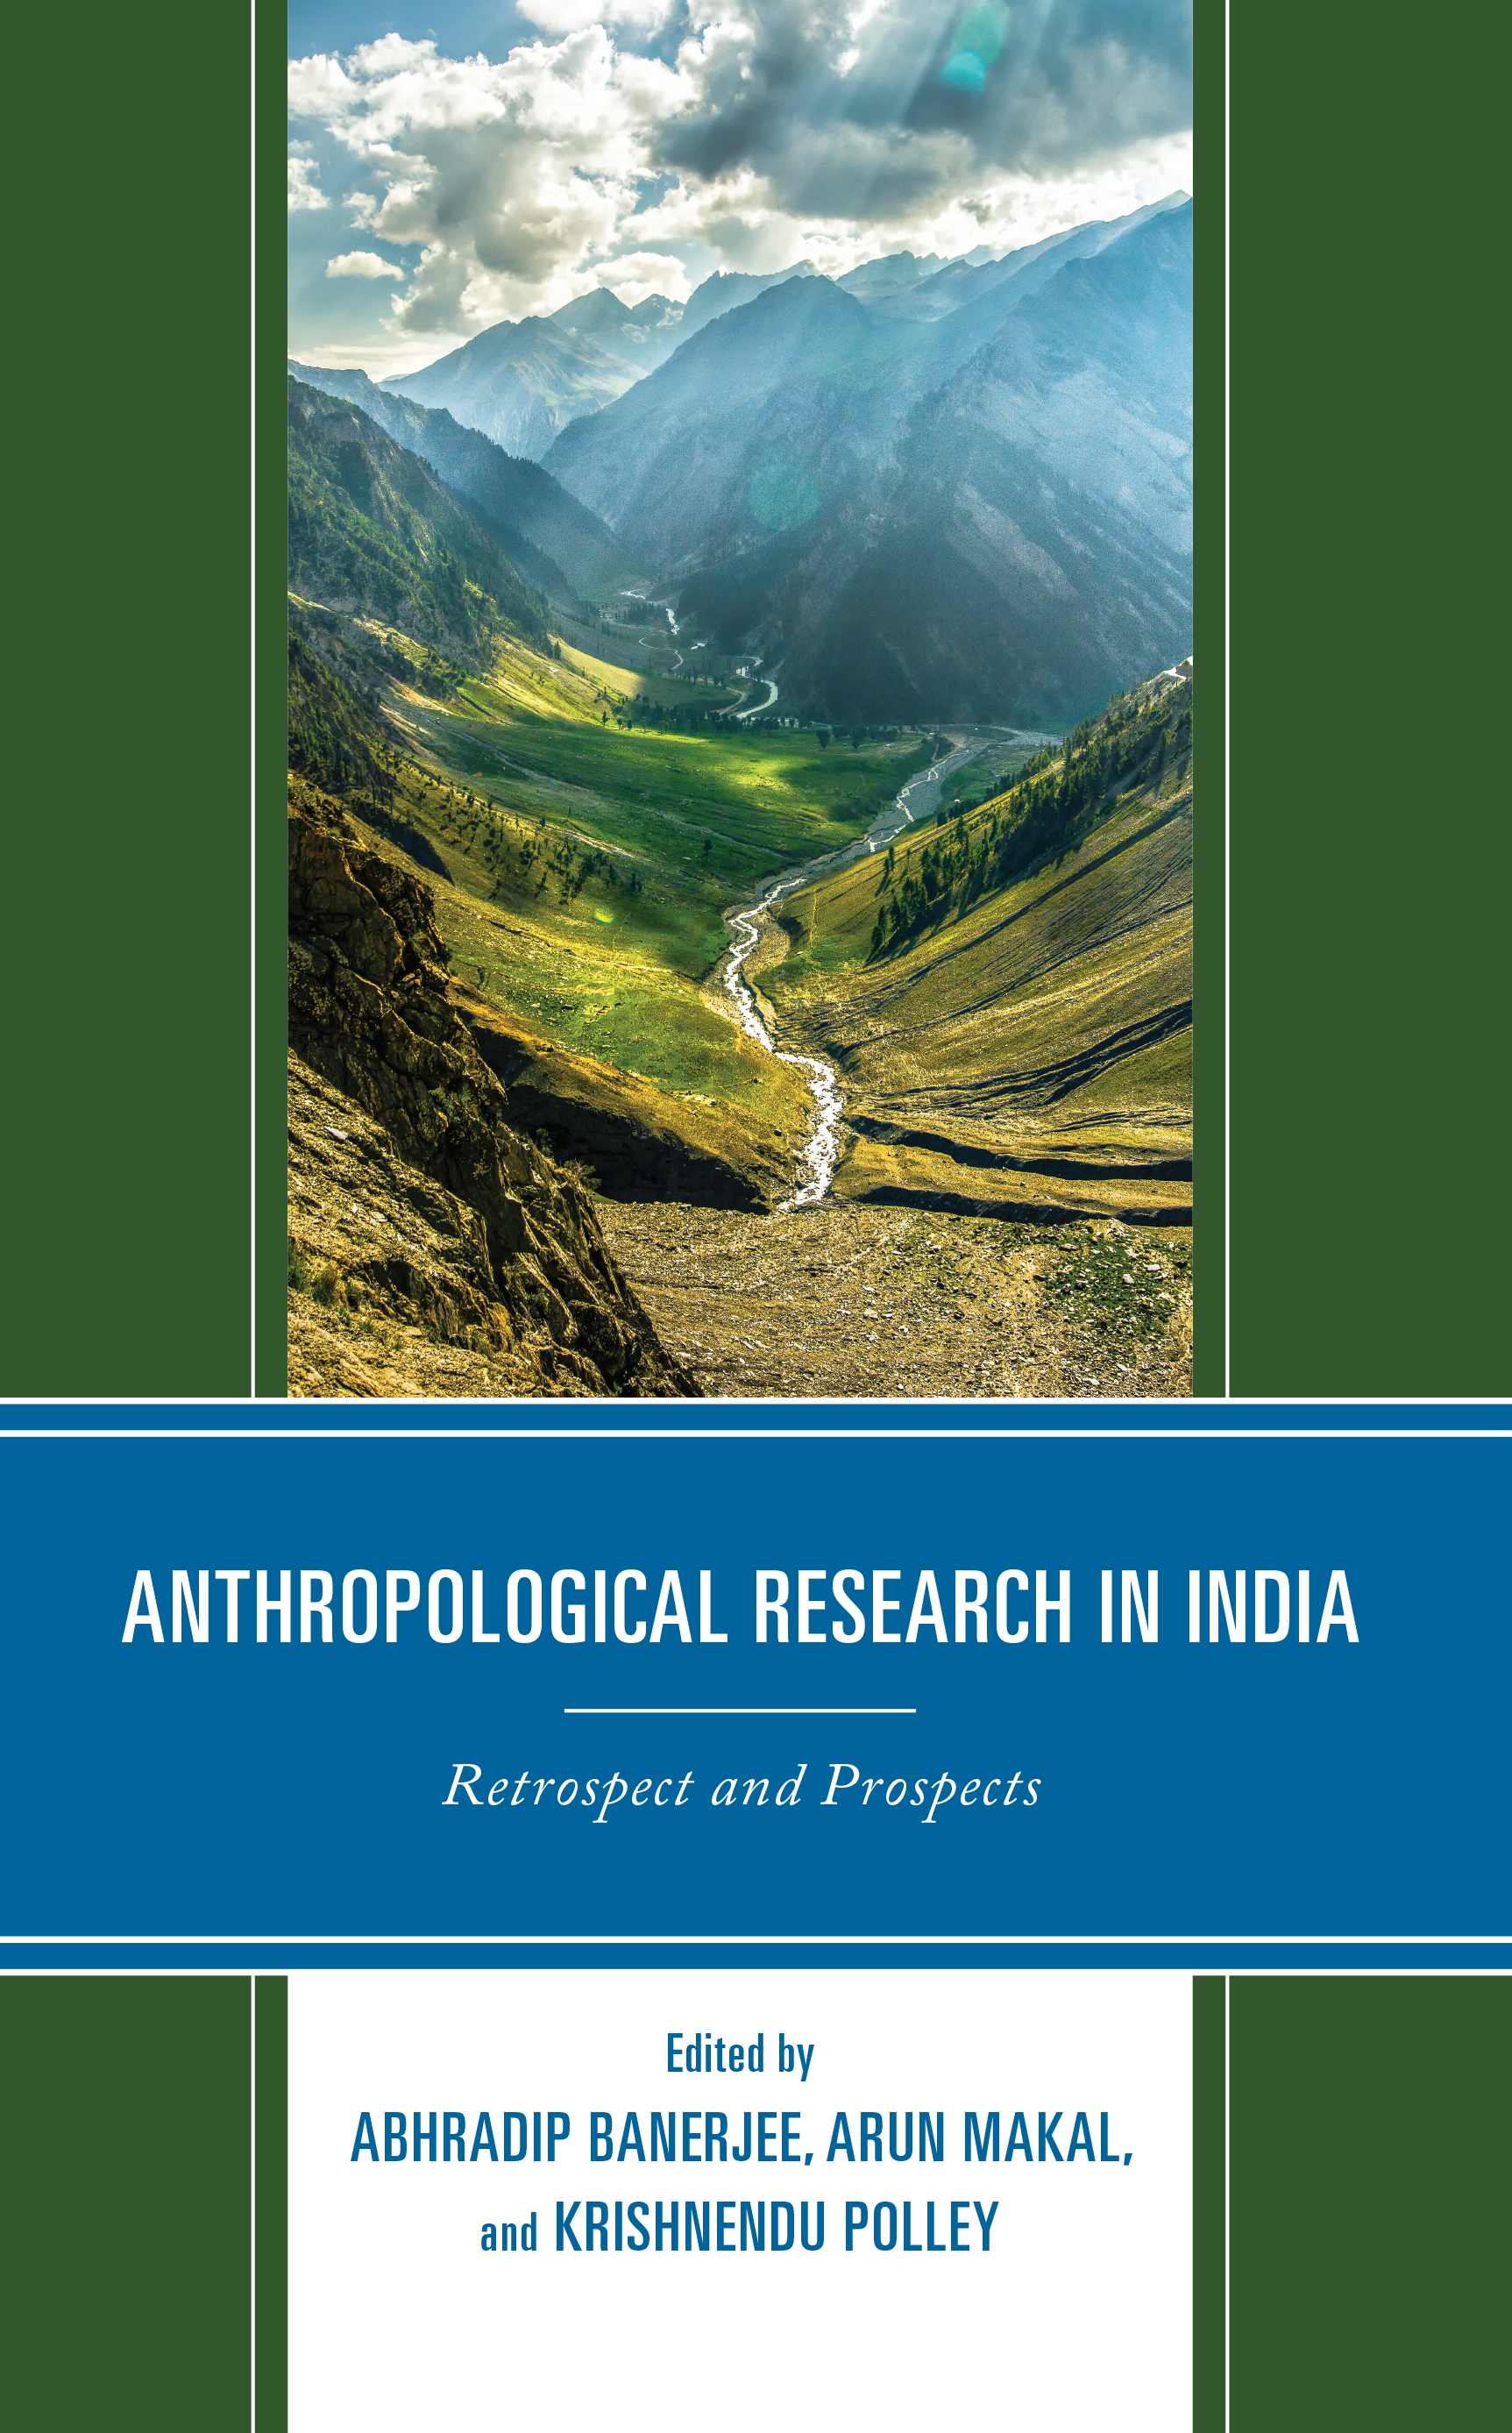 Anthropological Research in India: Retrospect and Prospects